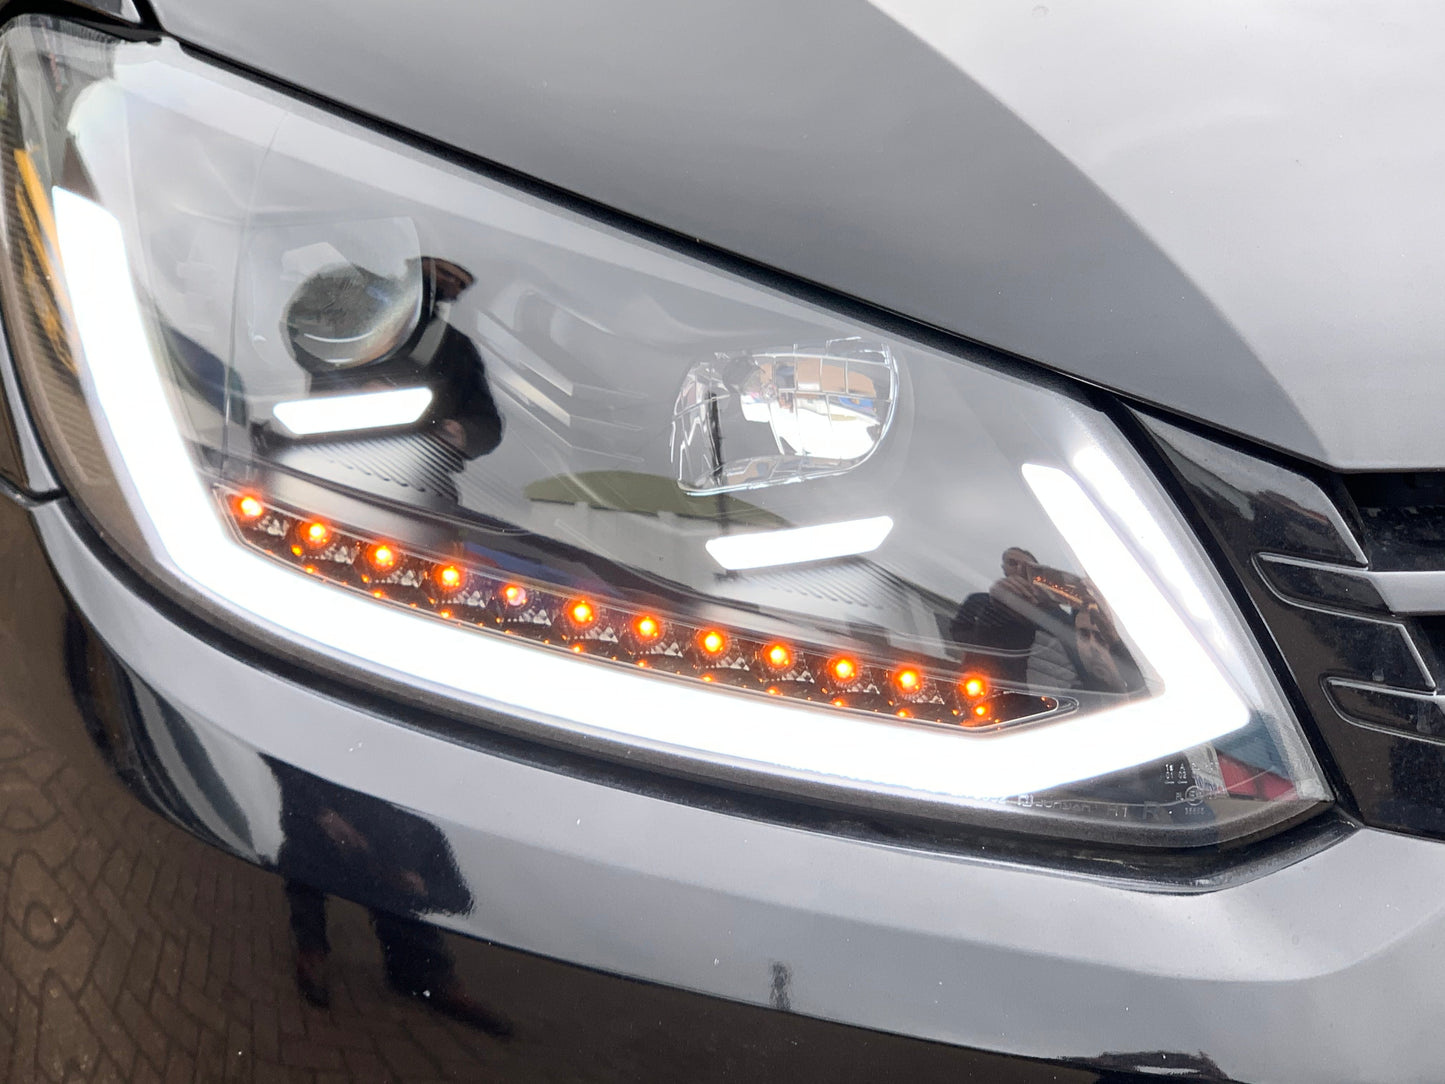 VW Caddy MK3 DRL headlights with dynamic indicators 10-15 (Includes LED dipped & main beam bulbs)